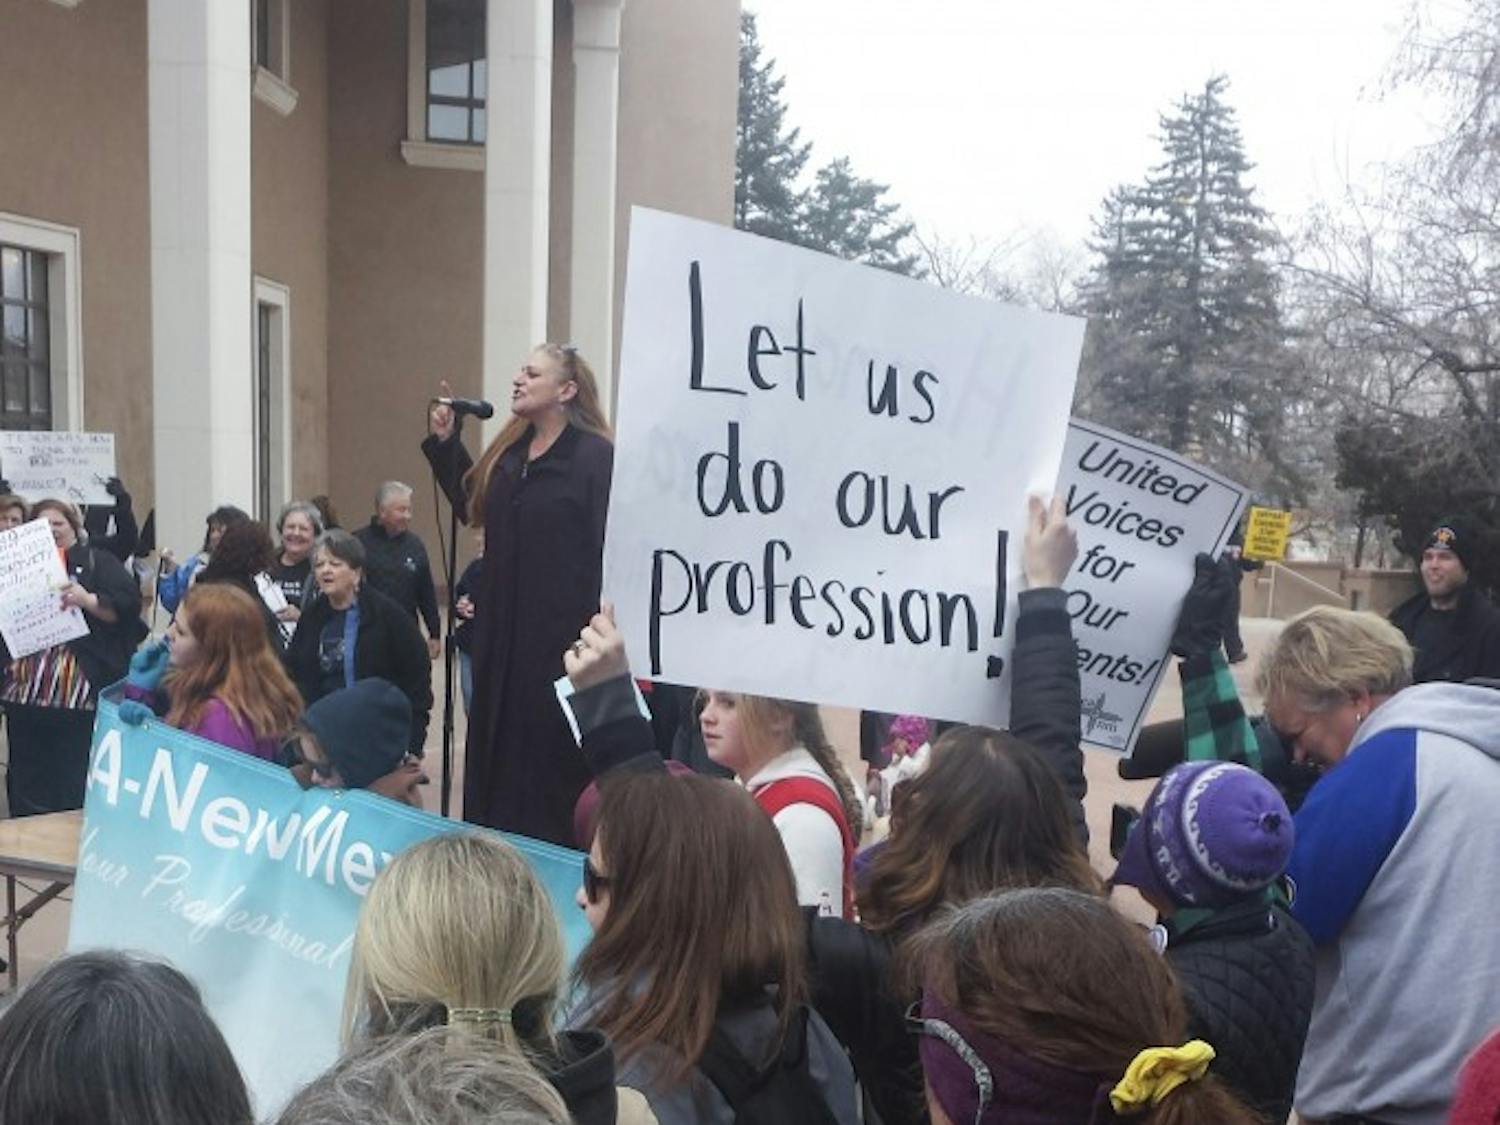 Teachers gather on Monday afternoon at the Roundhouse in Santa Fe to protest legislative proposals that could be detrimental to the education profession.